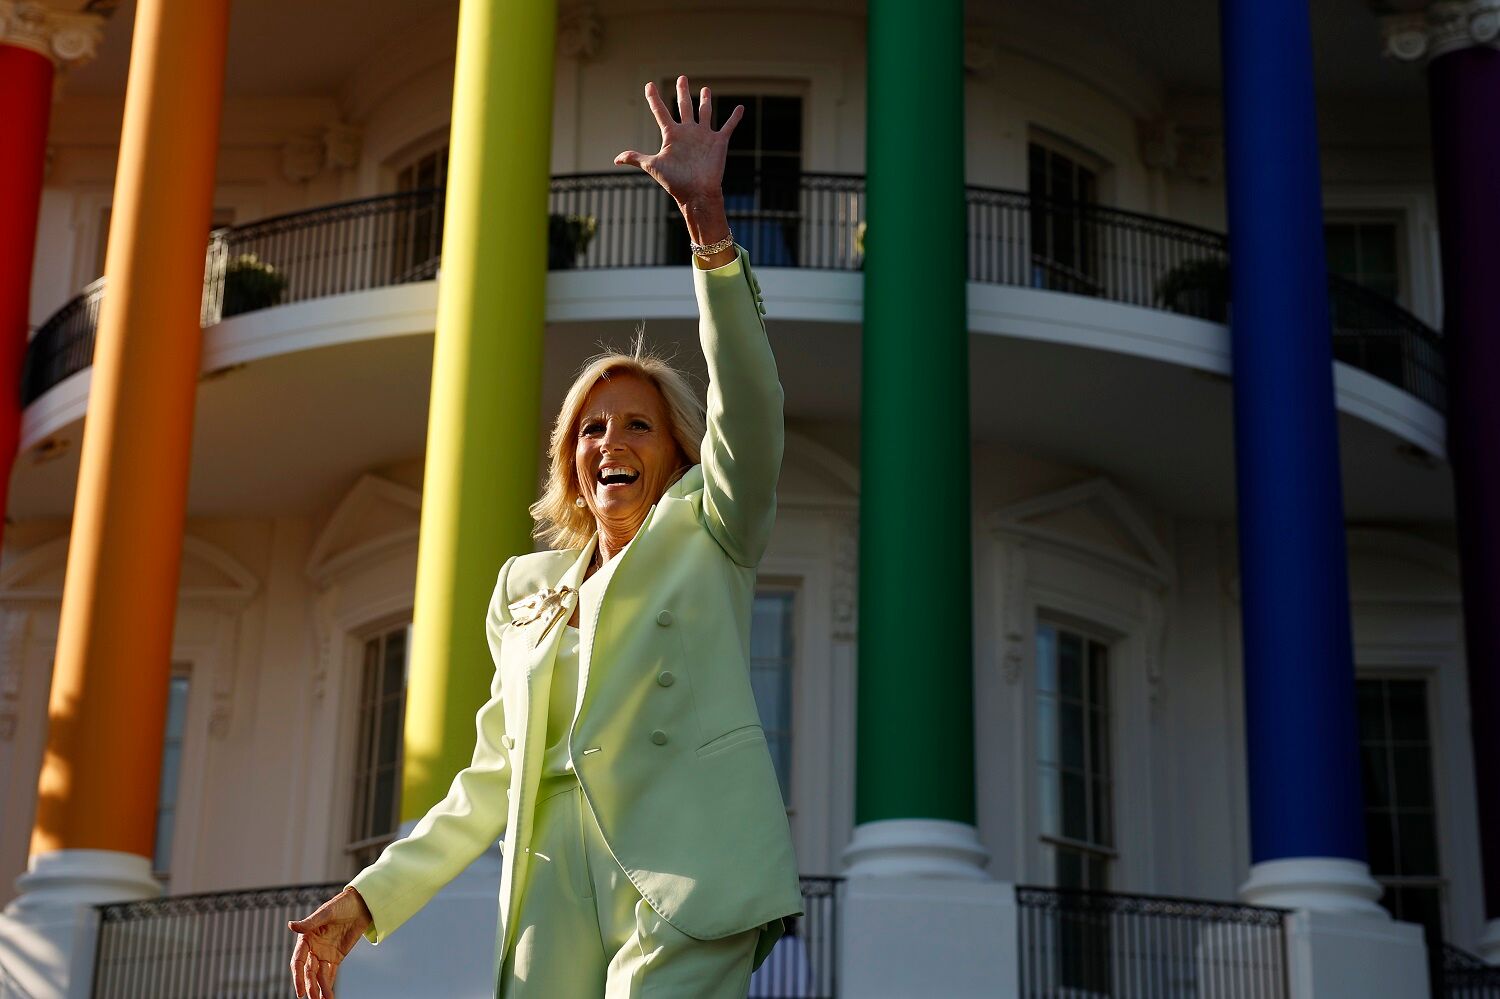 WASHINGTON, DC - JUNE 26: U.S. First lady Jill Biden walks onstage during a Pride celebration on the South Lawn of the White House